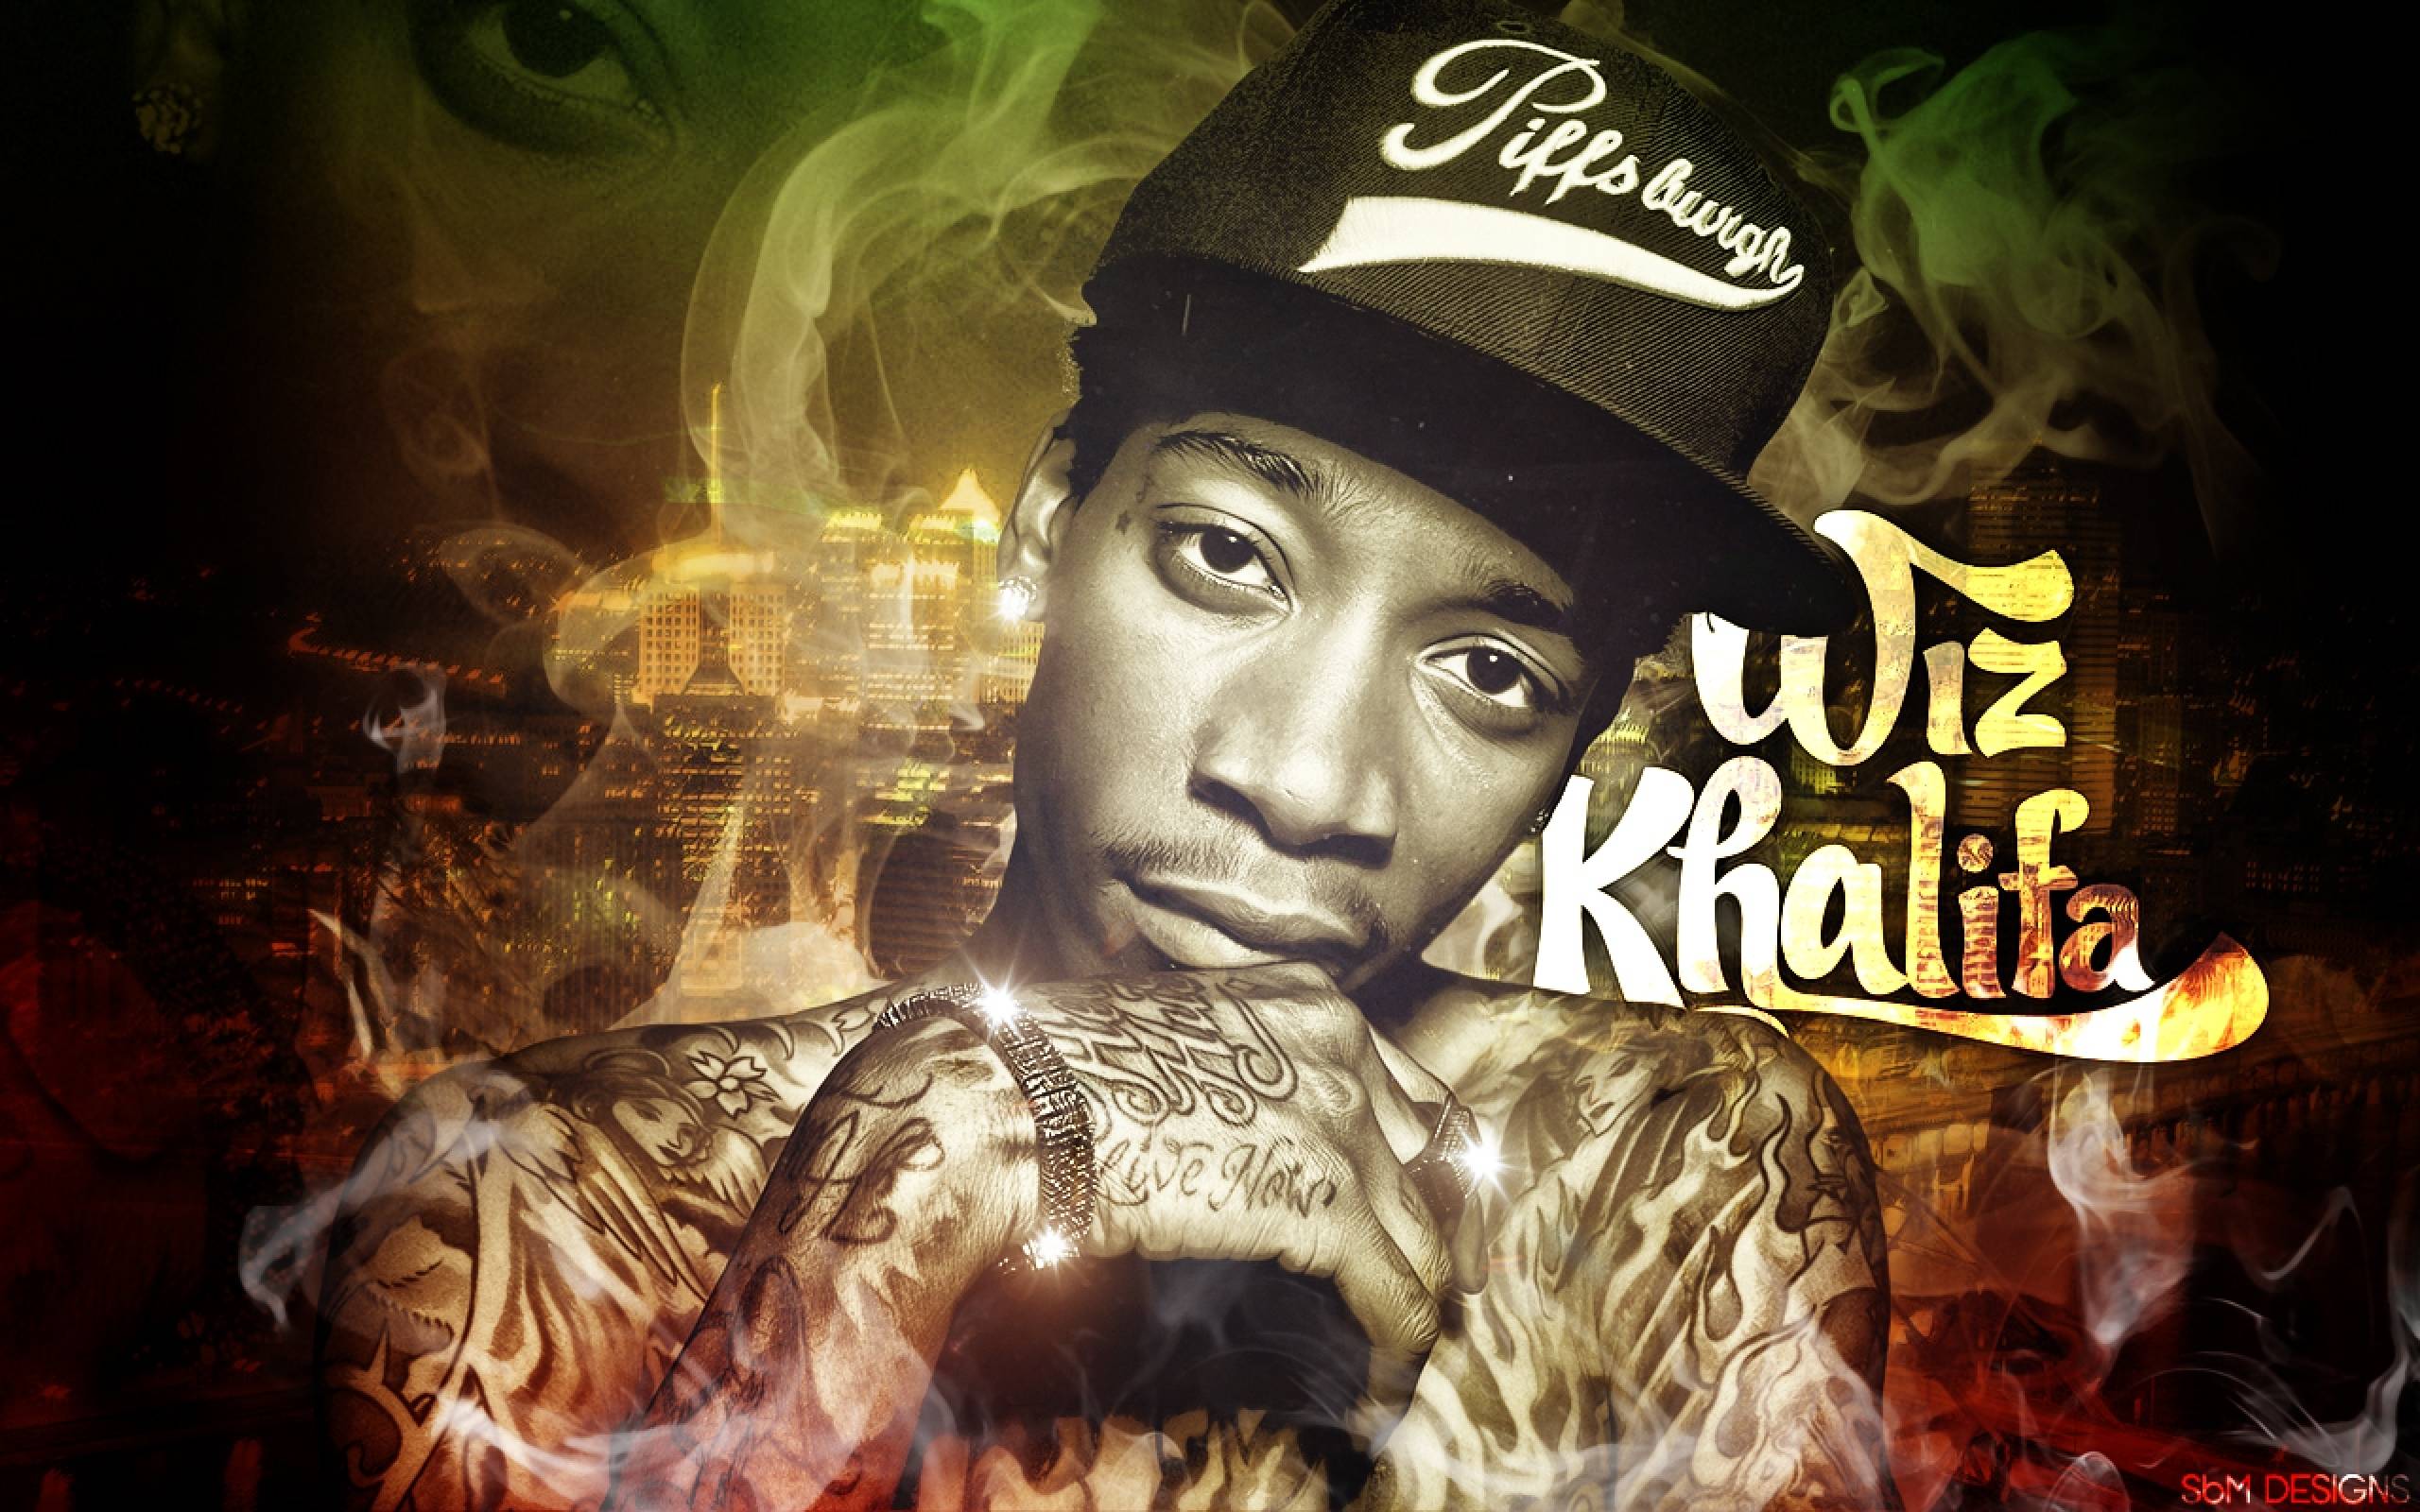 Wiz Khalifa Albums Covers Wallpapers